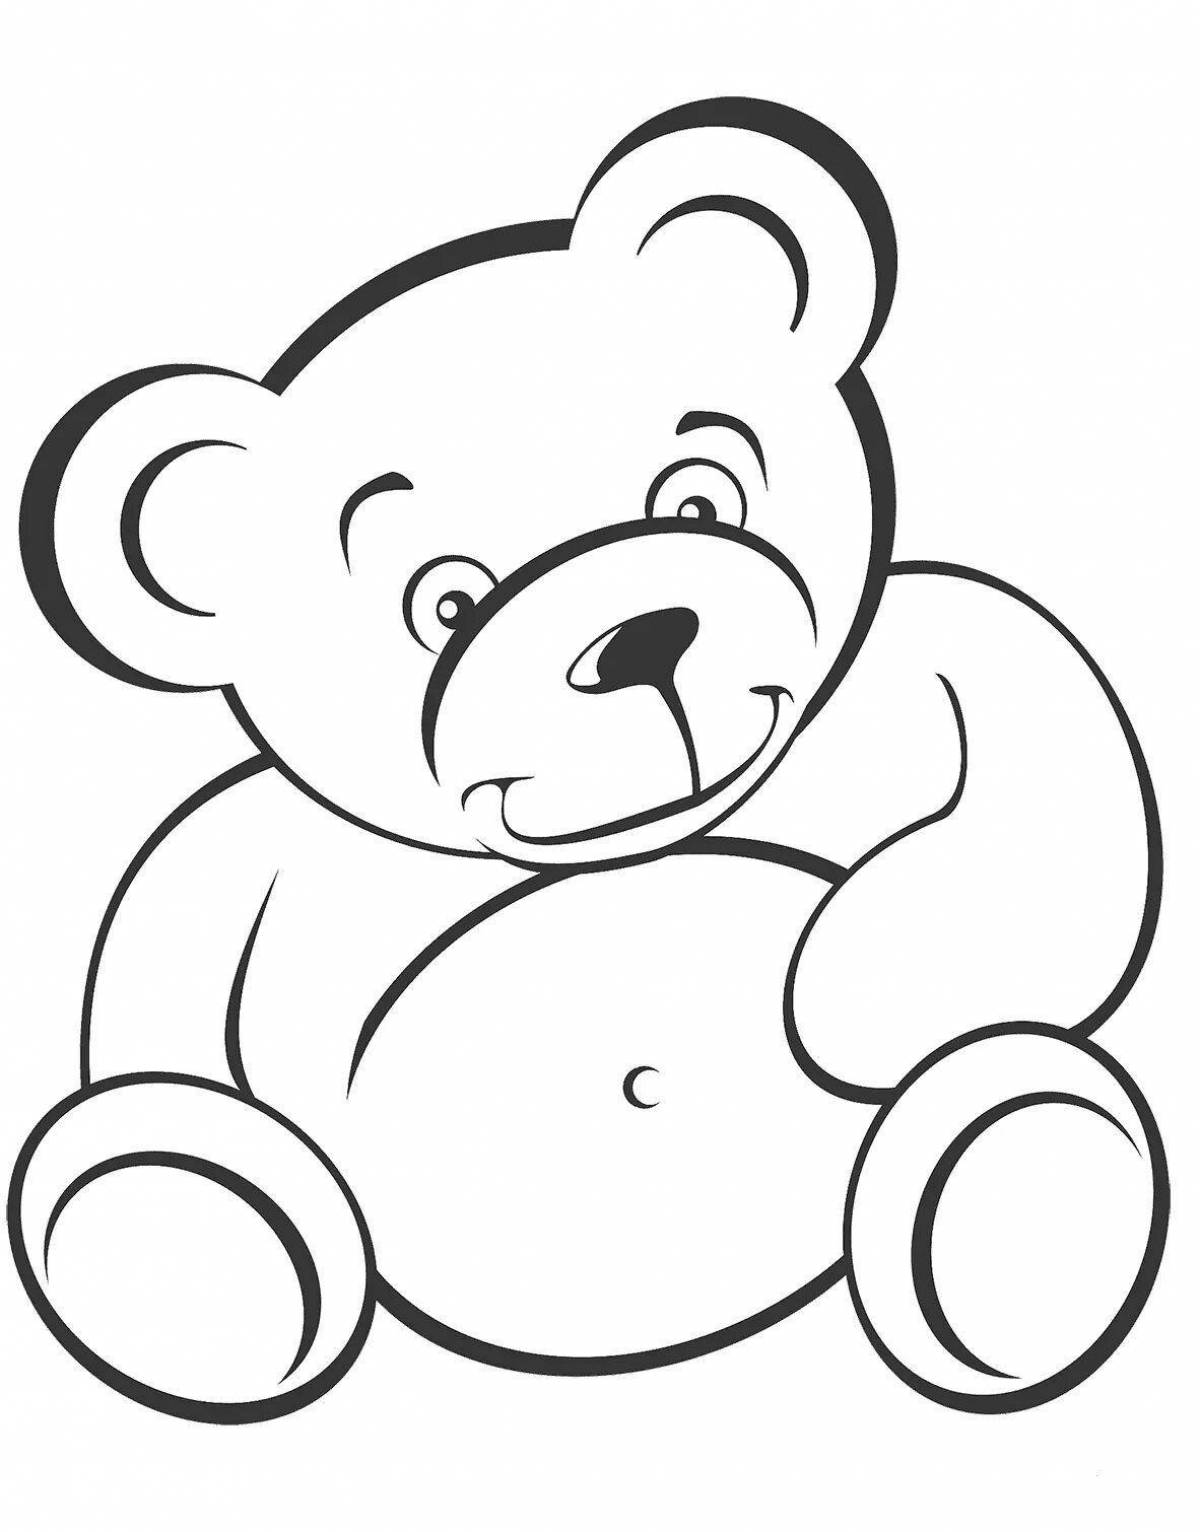 Naughty teddy bear coloring book for kids